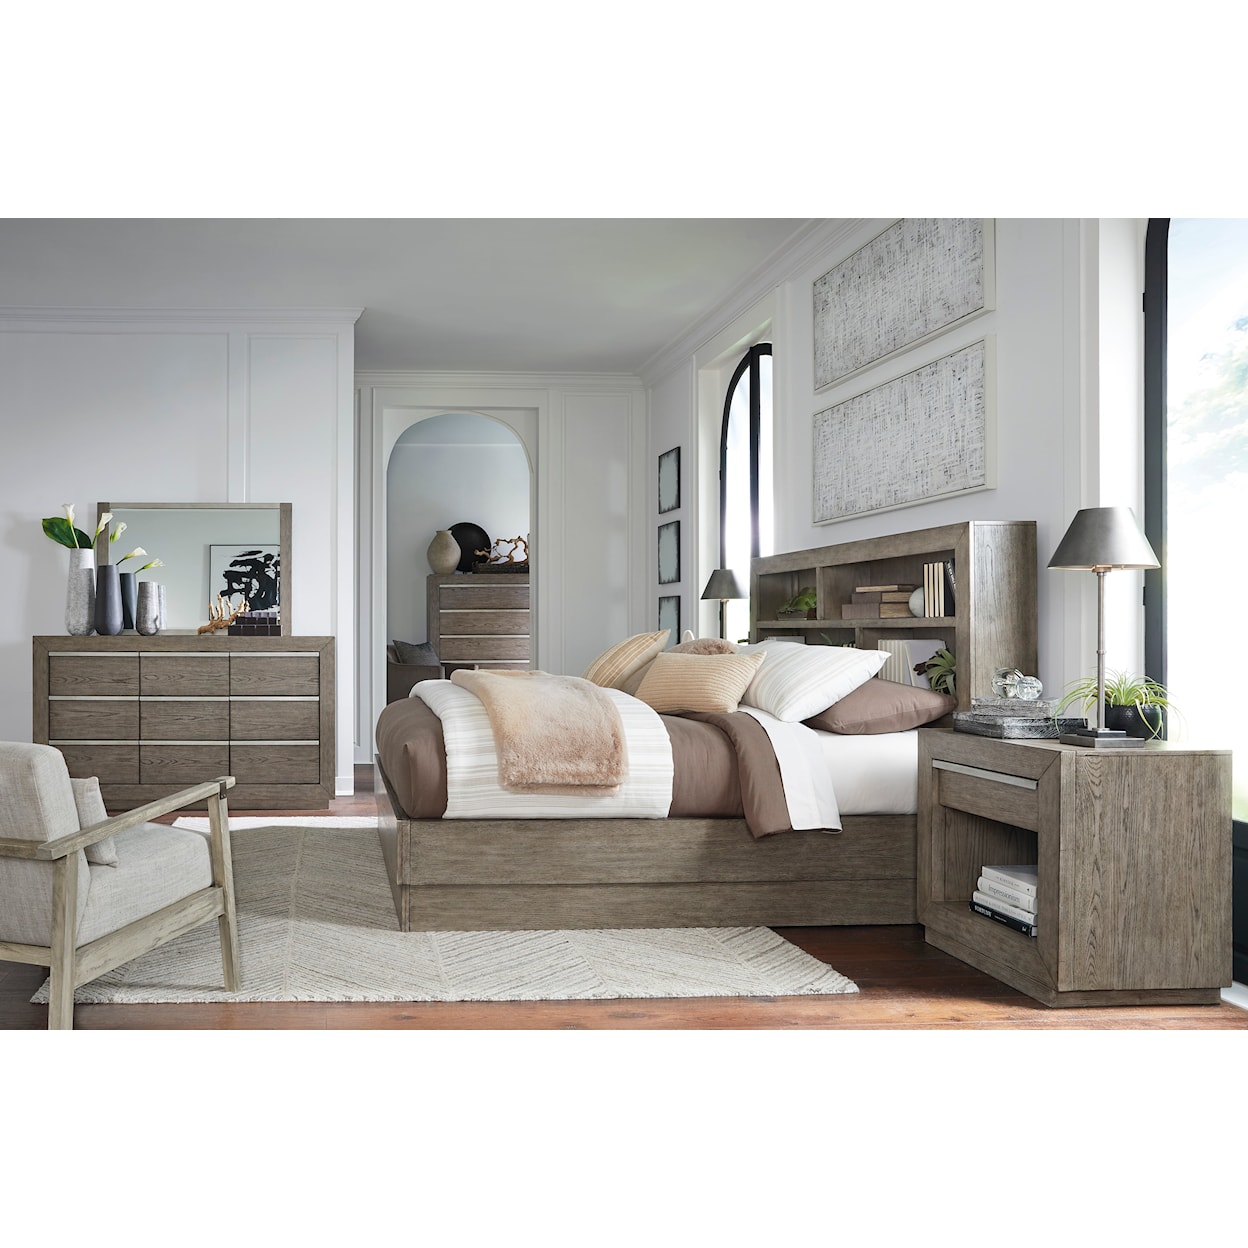 JB King Anibecca Queen Bookcase Bed